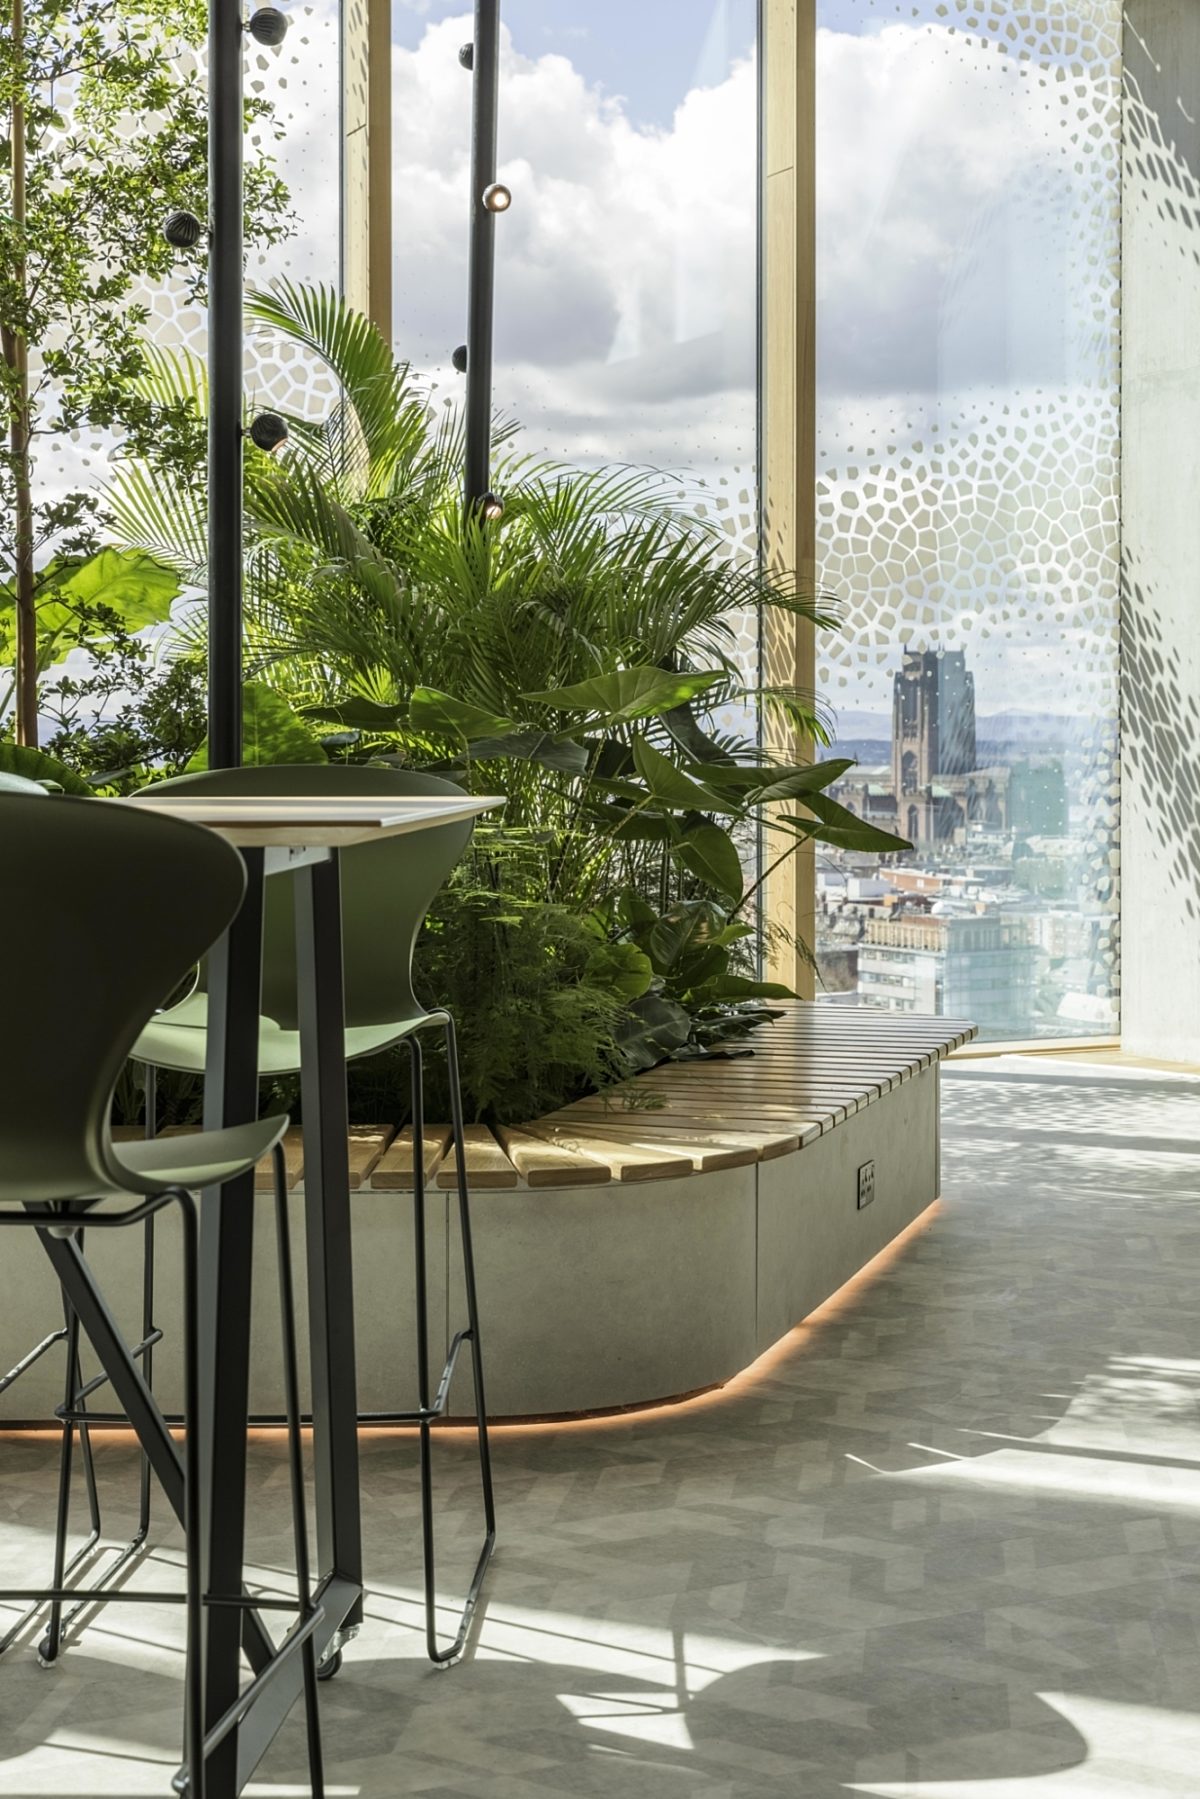 Natural planting enhances office users wellbeing